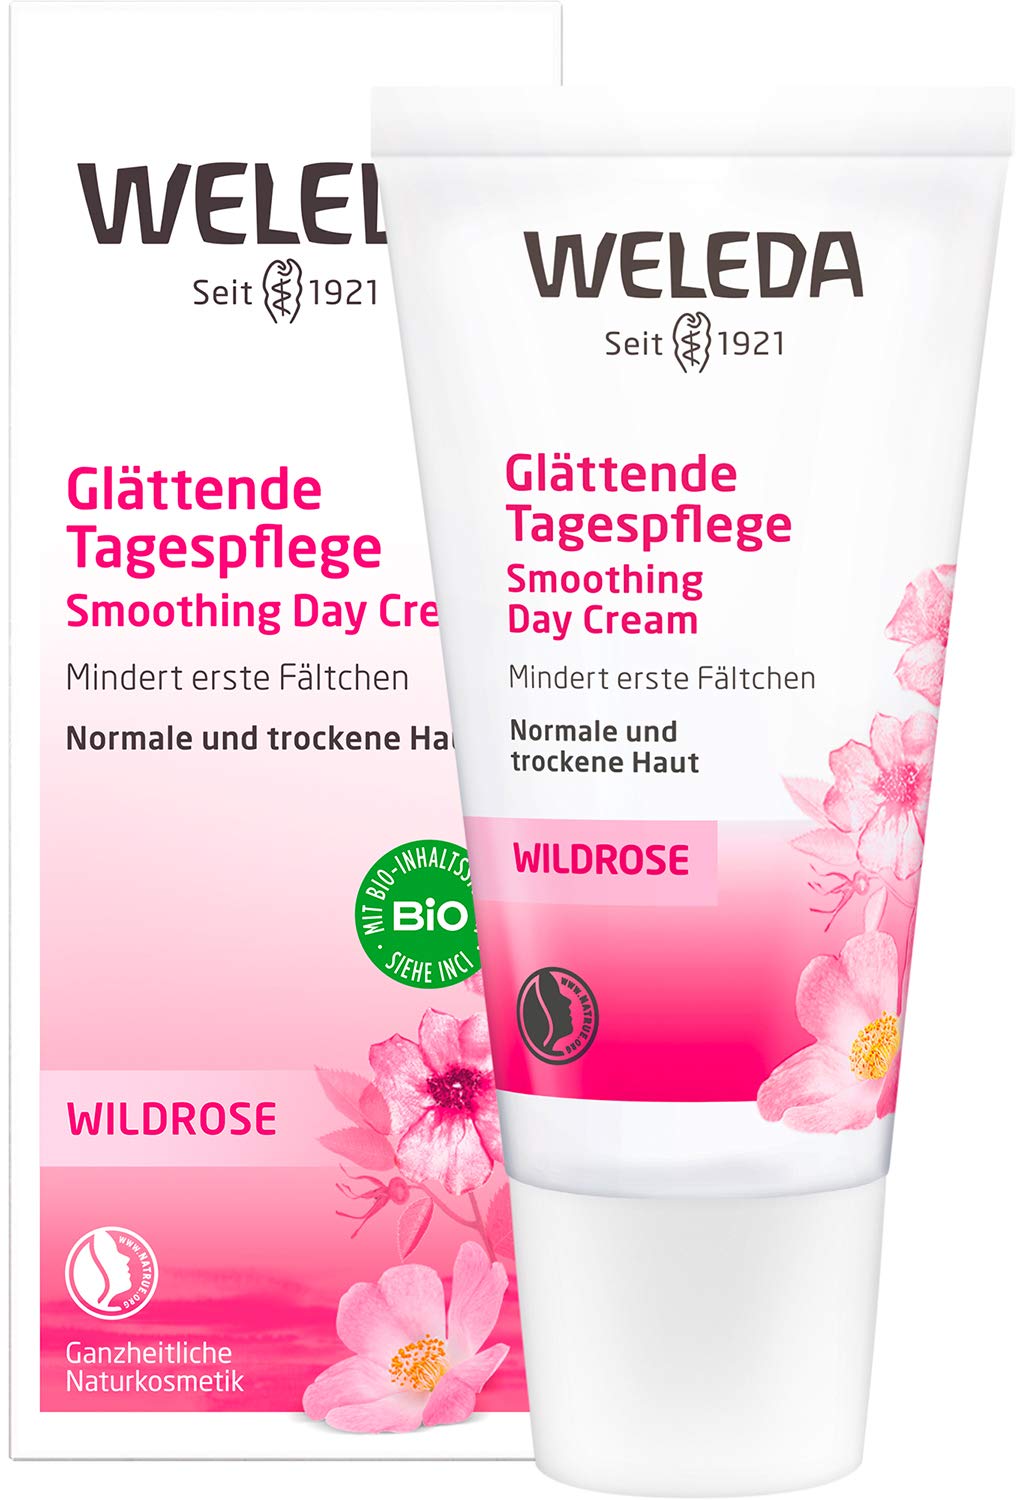 WELEDA Organic Wild Rose Smoothing Day Cream, Natural Cosmetics Face Cream for Dry Skin to Protect Against Wrinkles and Skin Aging, for Vitality and Elasticity of the Skin (1 x 30 ml)